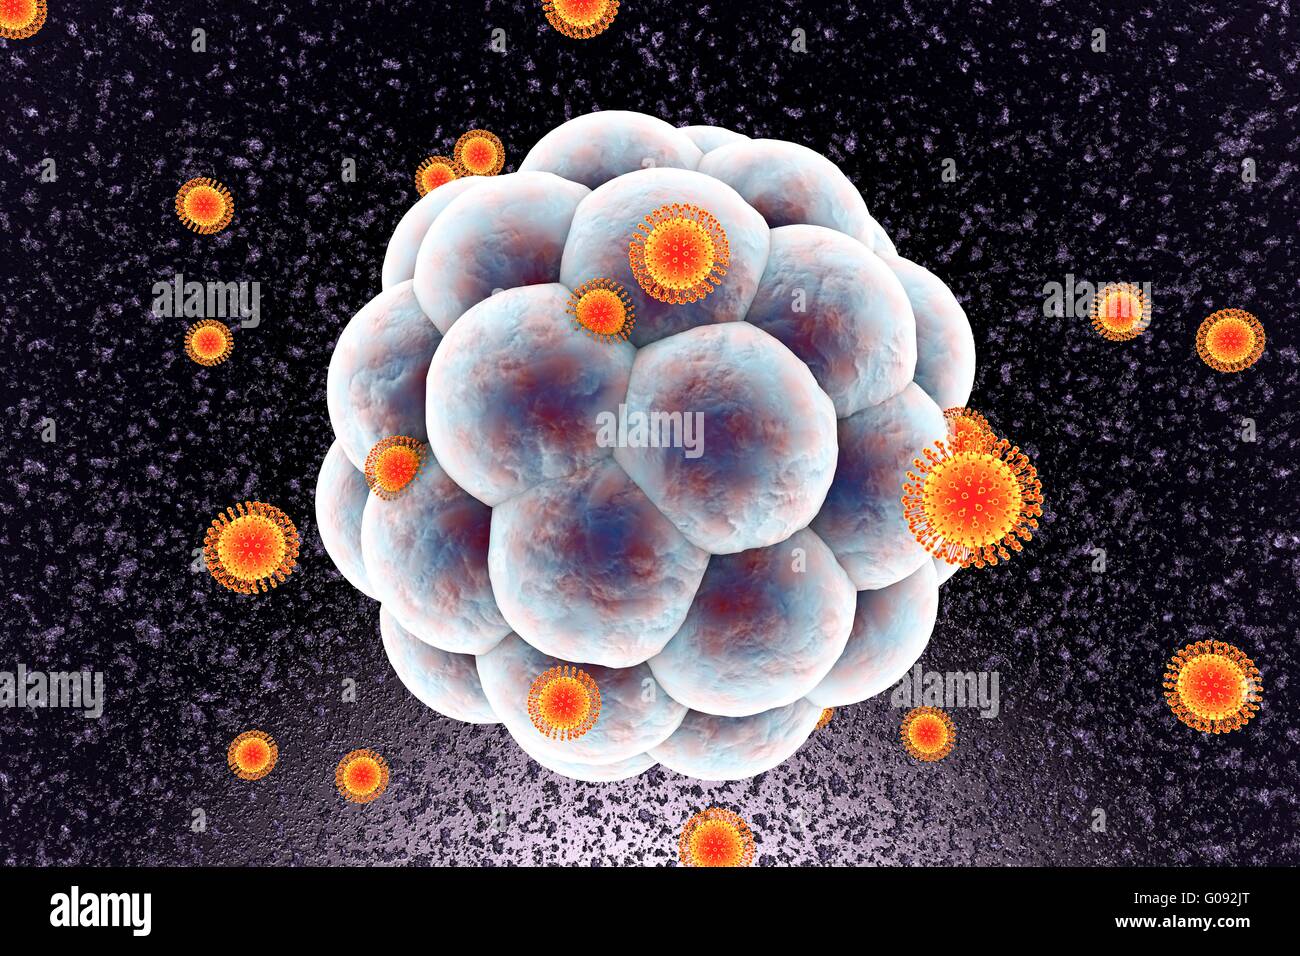 Zika viruses infecting human embryo, computer illustration. This is an RNA (ribonucleic acid) virus from the Flaviviridae family. It is transmitted to humans via the bite of an infected Aedes sp. mosquito. It causes zika fever, a mild disease with symptoms including rash, joint pain and conjunctivitis. In 2015 a previously unknown connection between Zika infection in pregnant women and microcephaly (small head) in newborns was reported. This can cause miscarriage or death soon after birth, or lead to developmental delays and disorders. Stock Photo